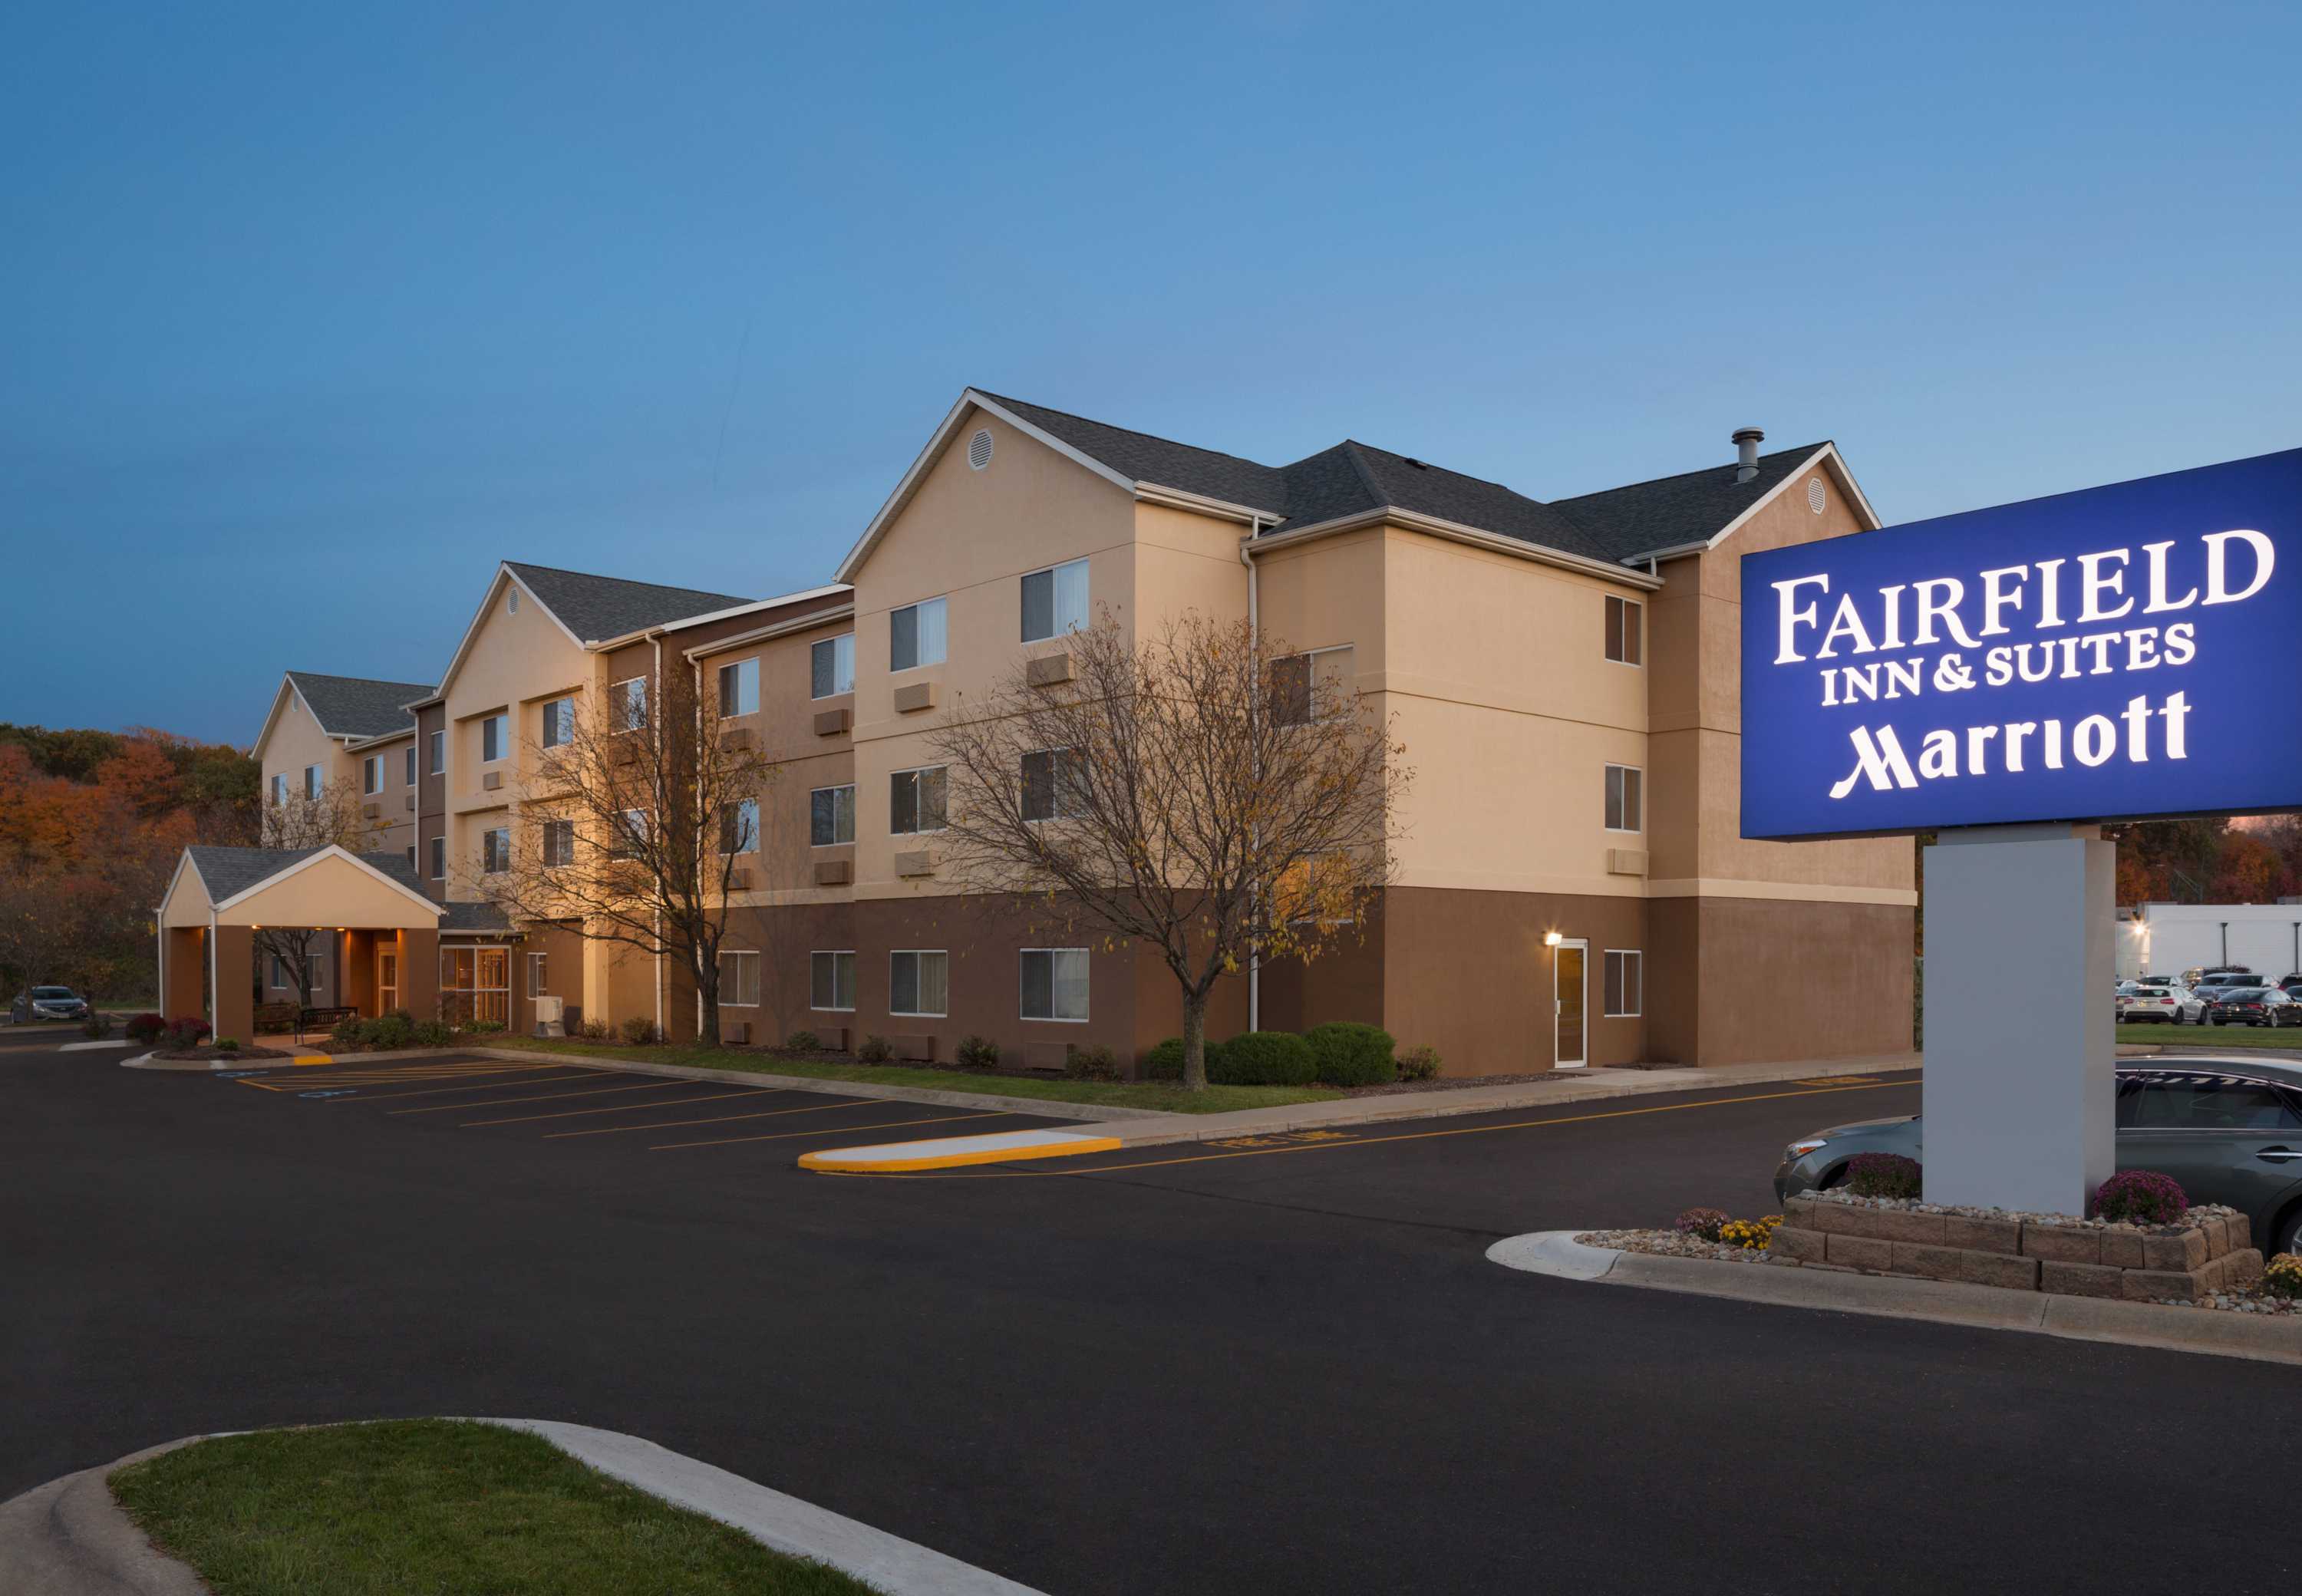 Photo of Fairfield Inn & Suites by Marriott Youngstown Boardman/Poland, Poland, OH